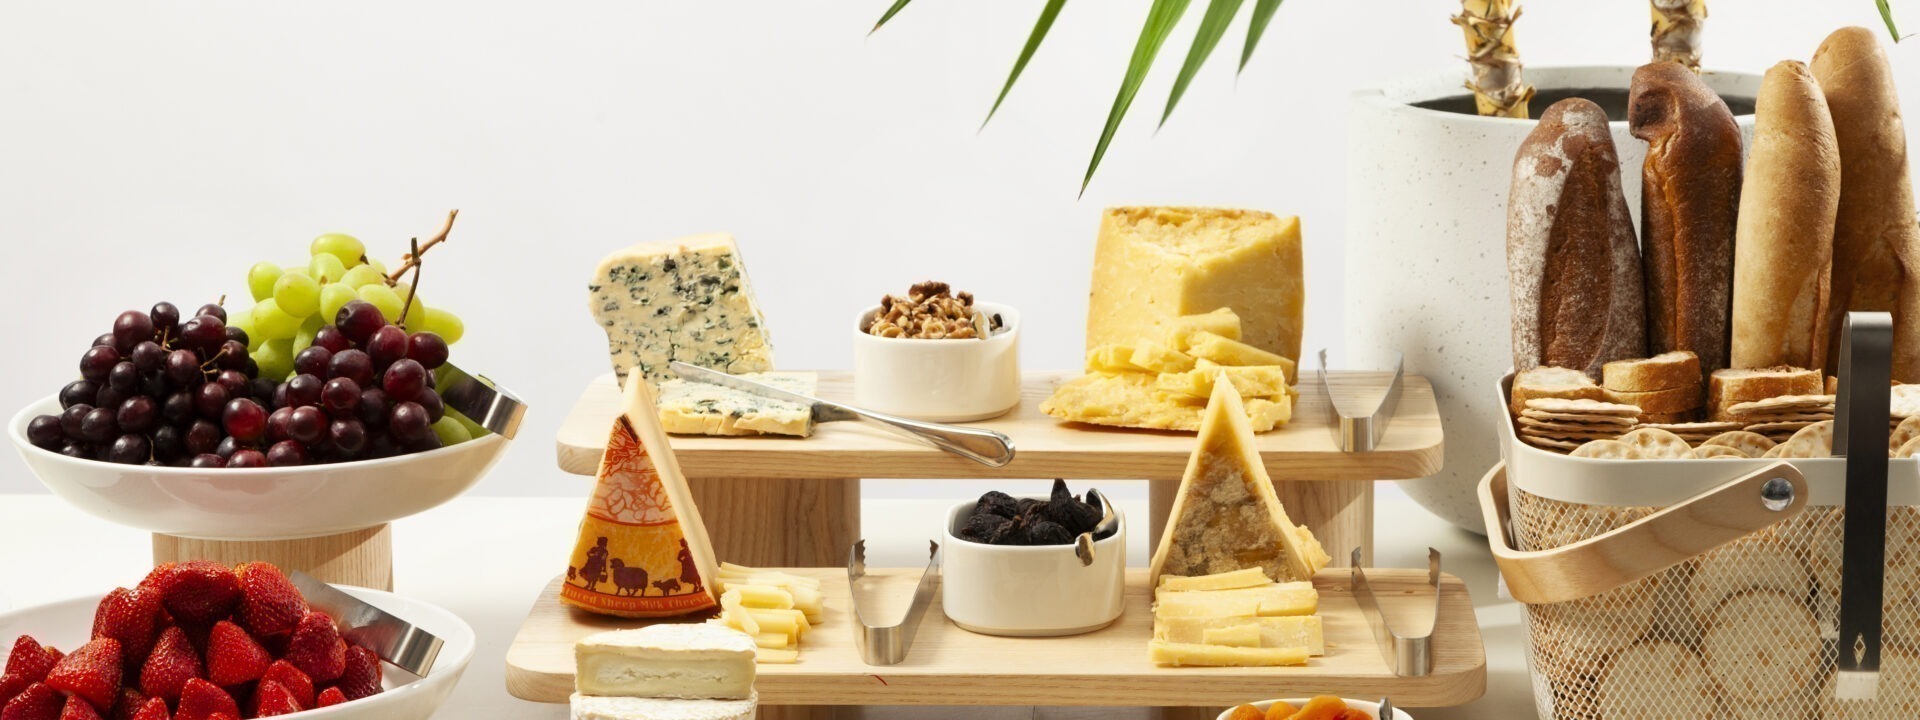 CHEESE TASTING STATION